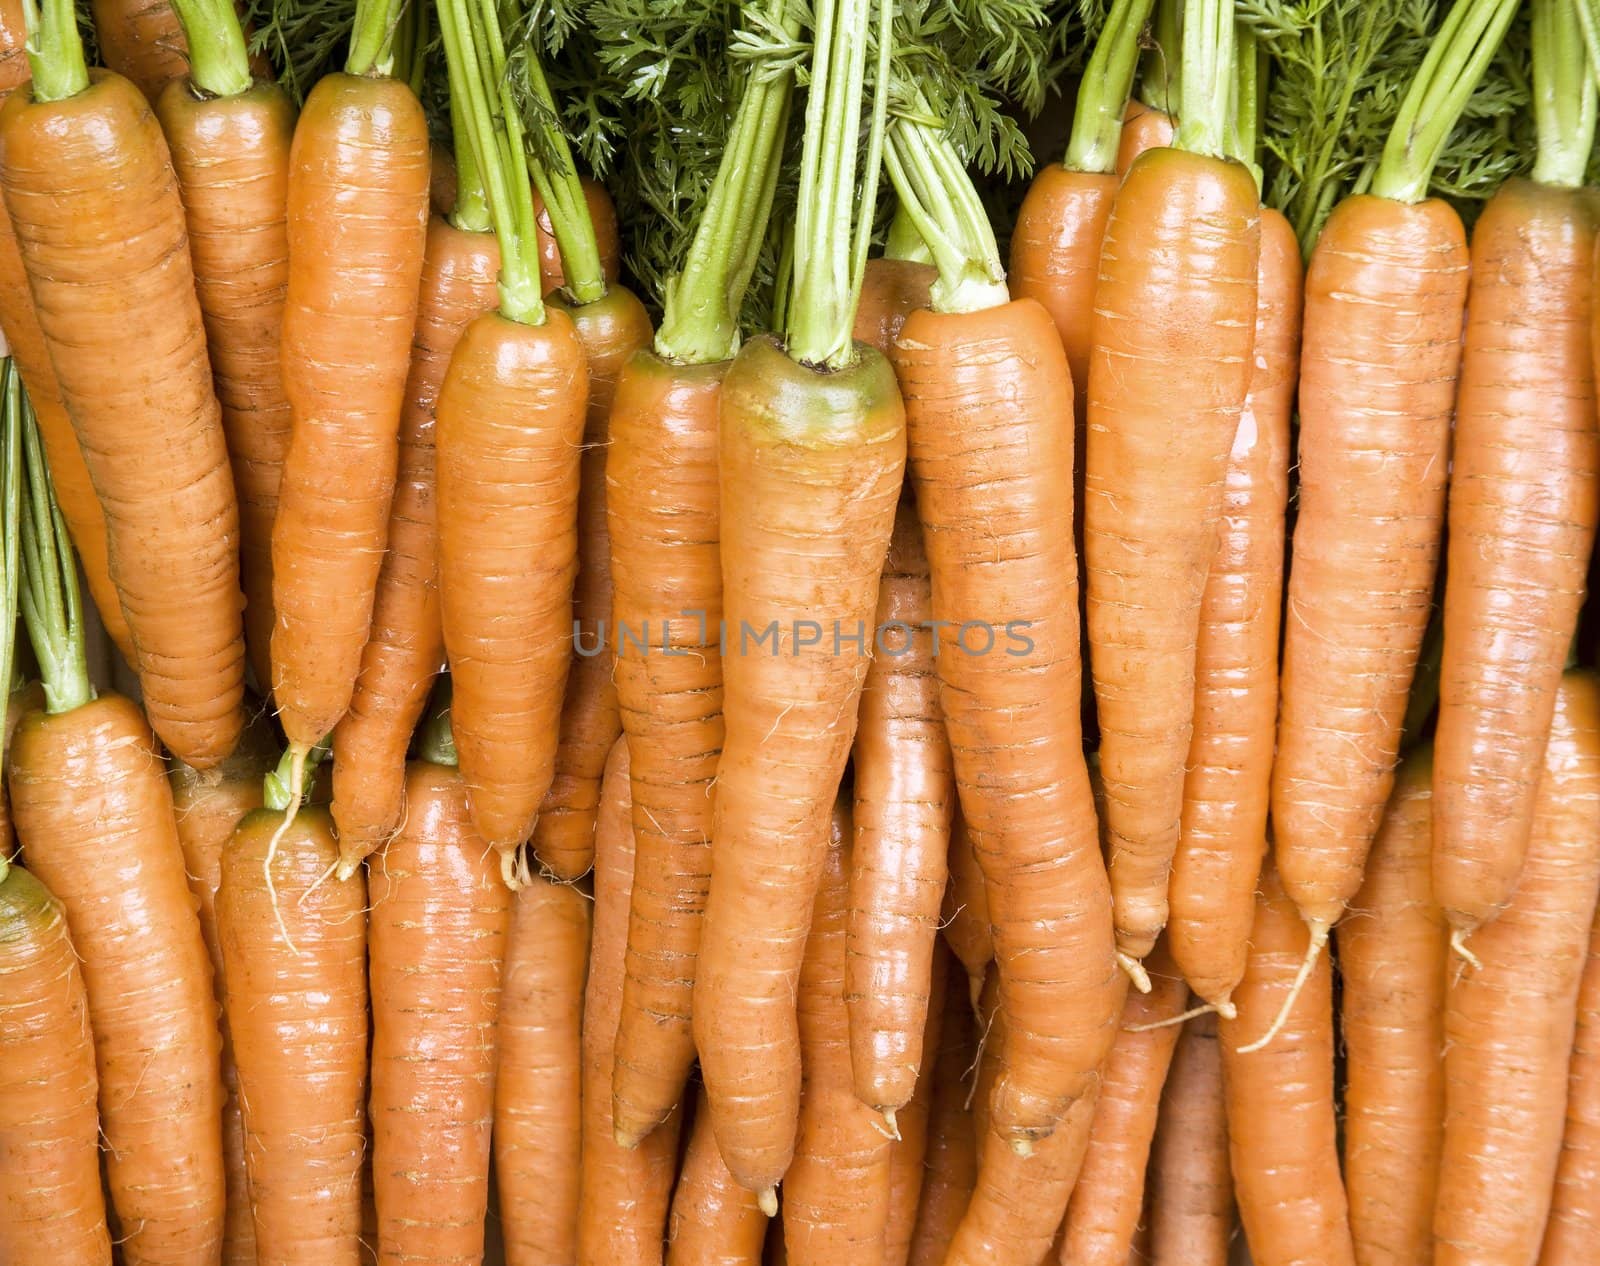 Many orange carrots against a leafy background